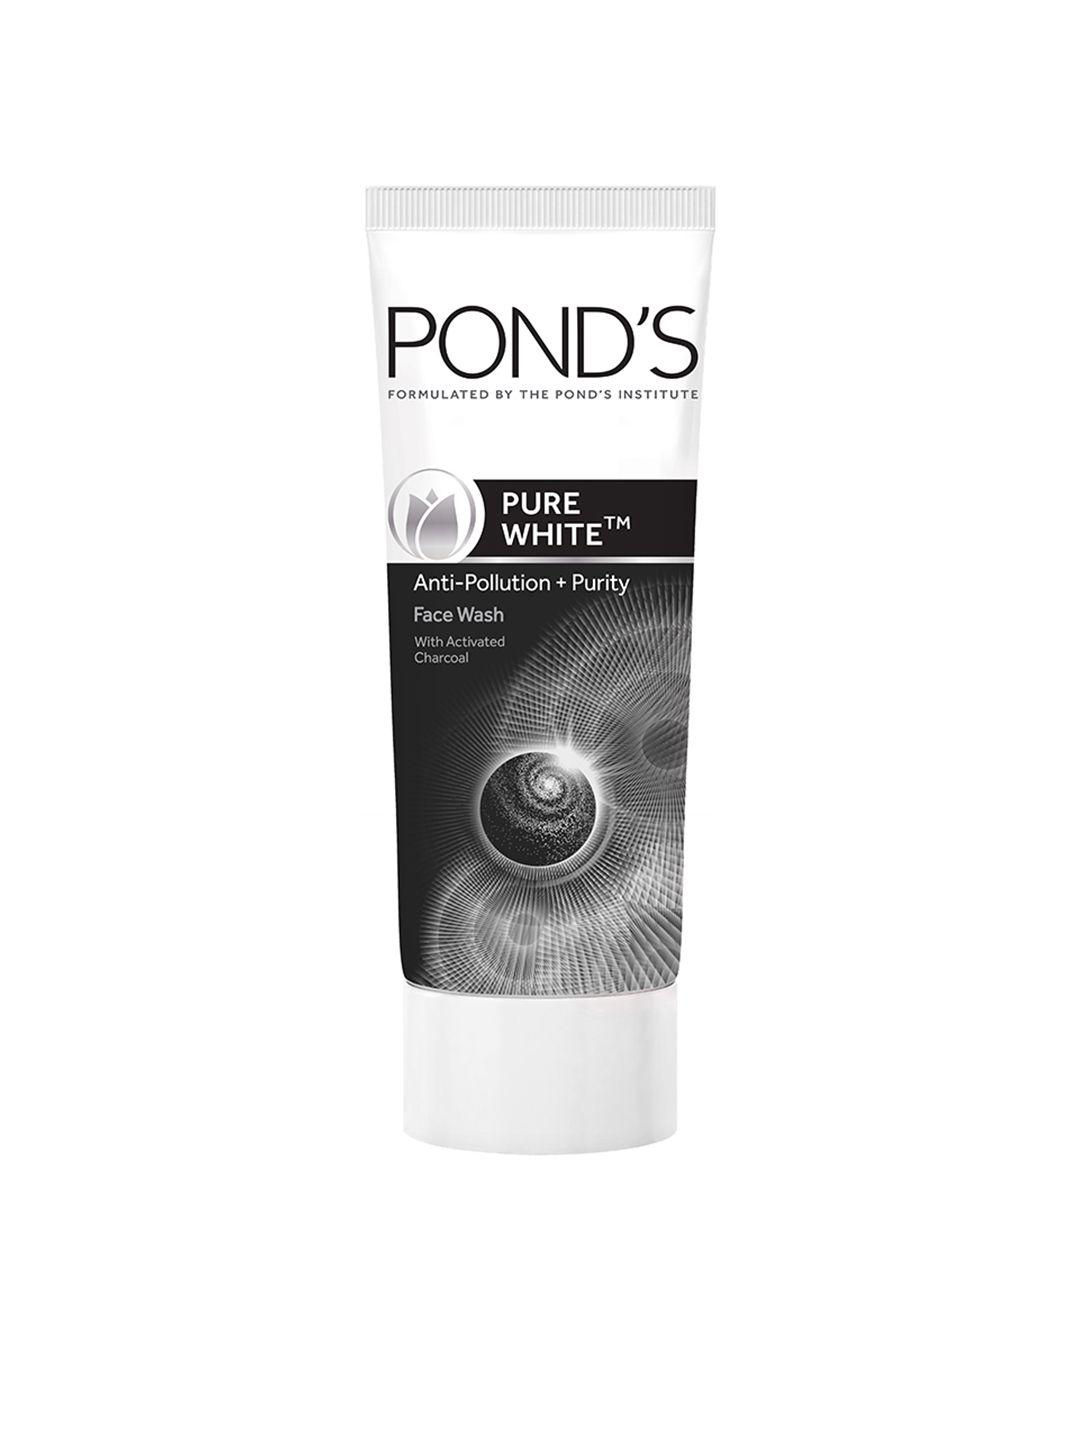 pond's-pure-white-anti-pollution-activated-charcoal-face-wash-150-gm